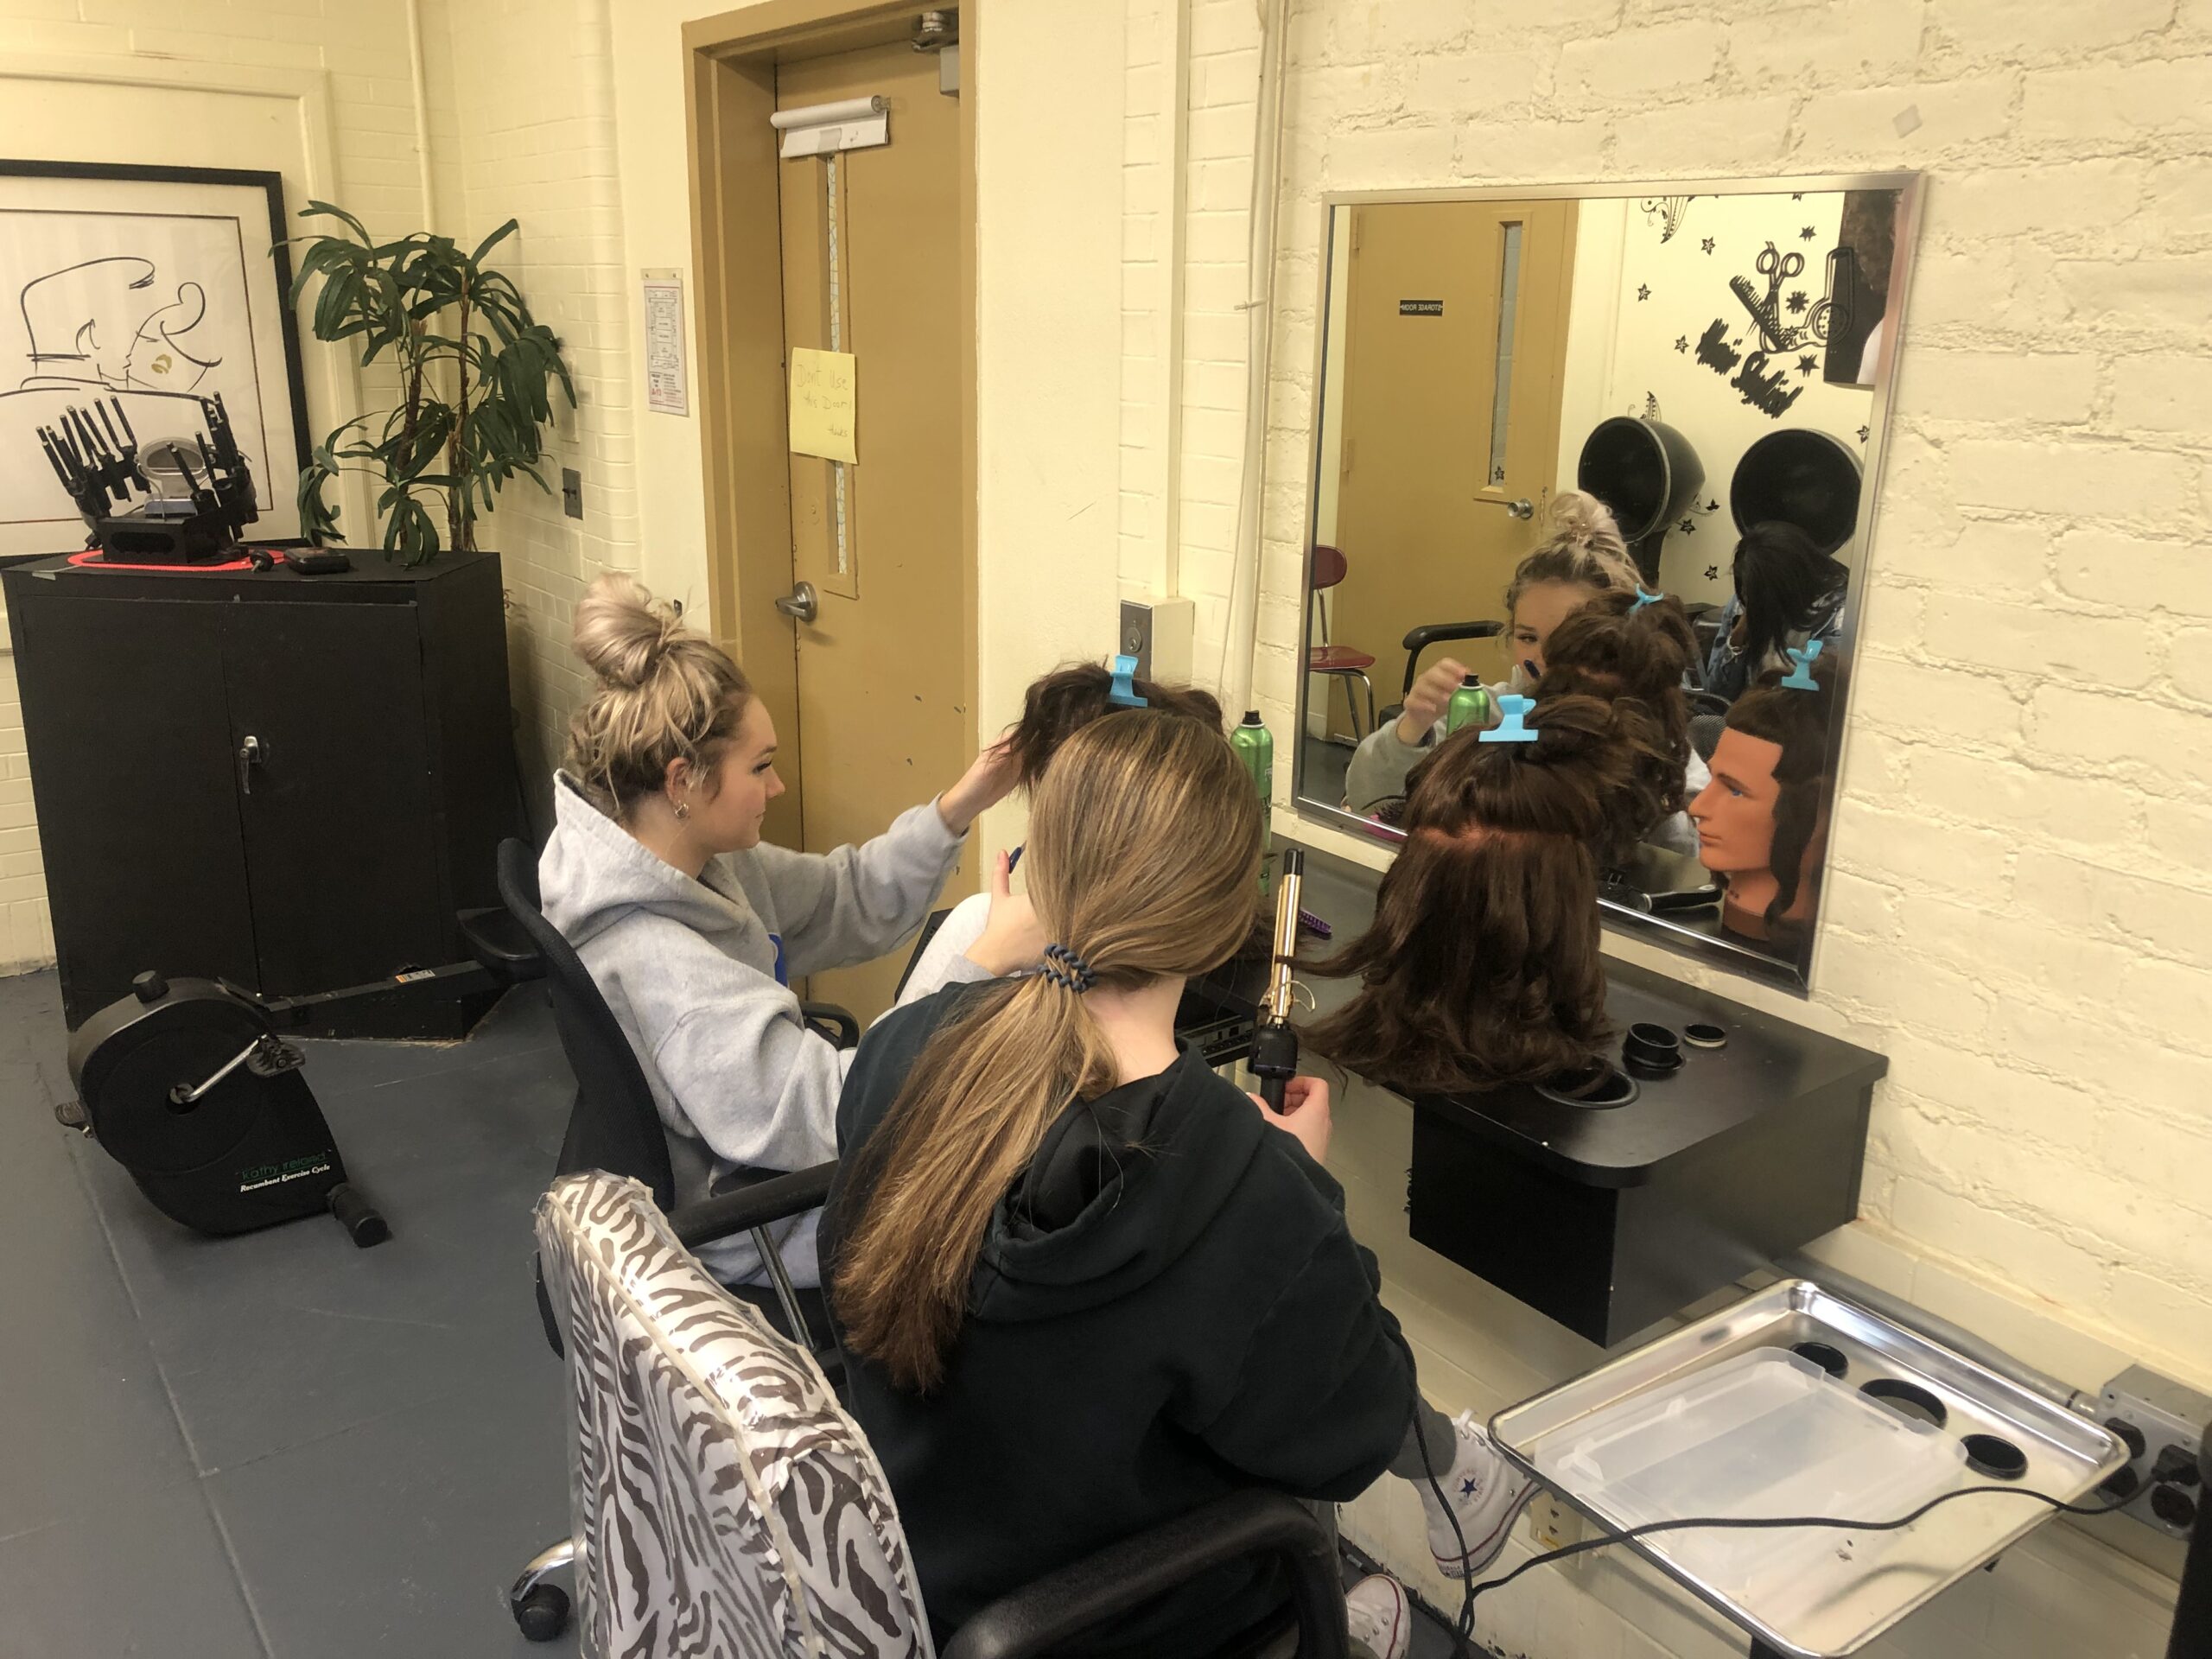 Students in cosmetology are using mannequins to practice their newly learned skills with a curling iron